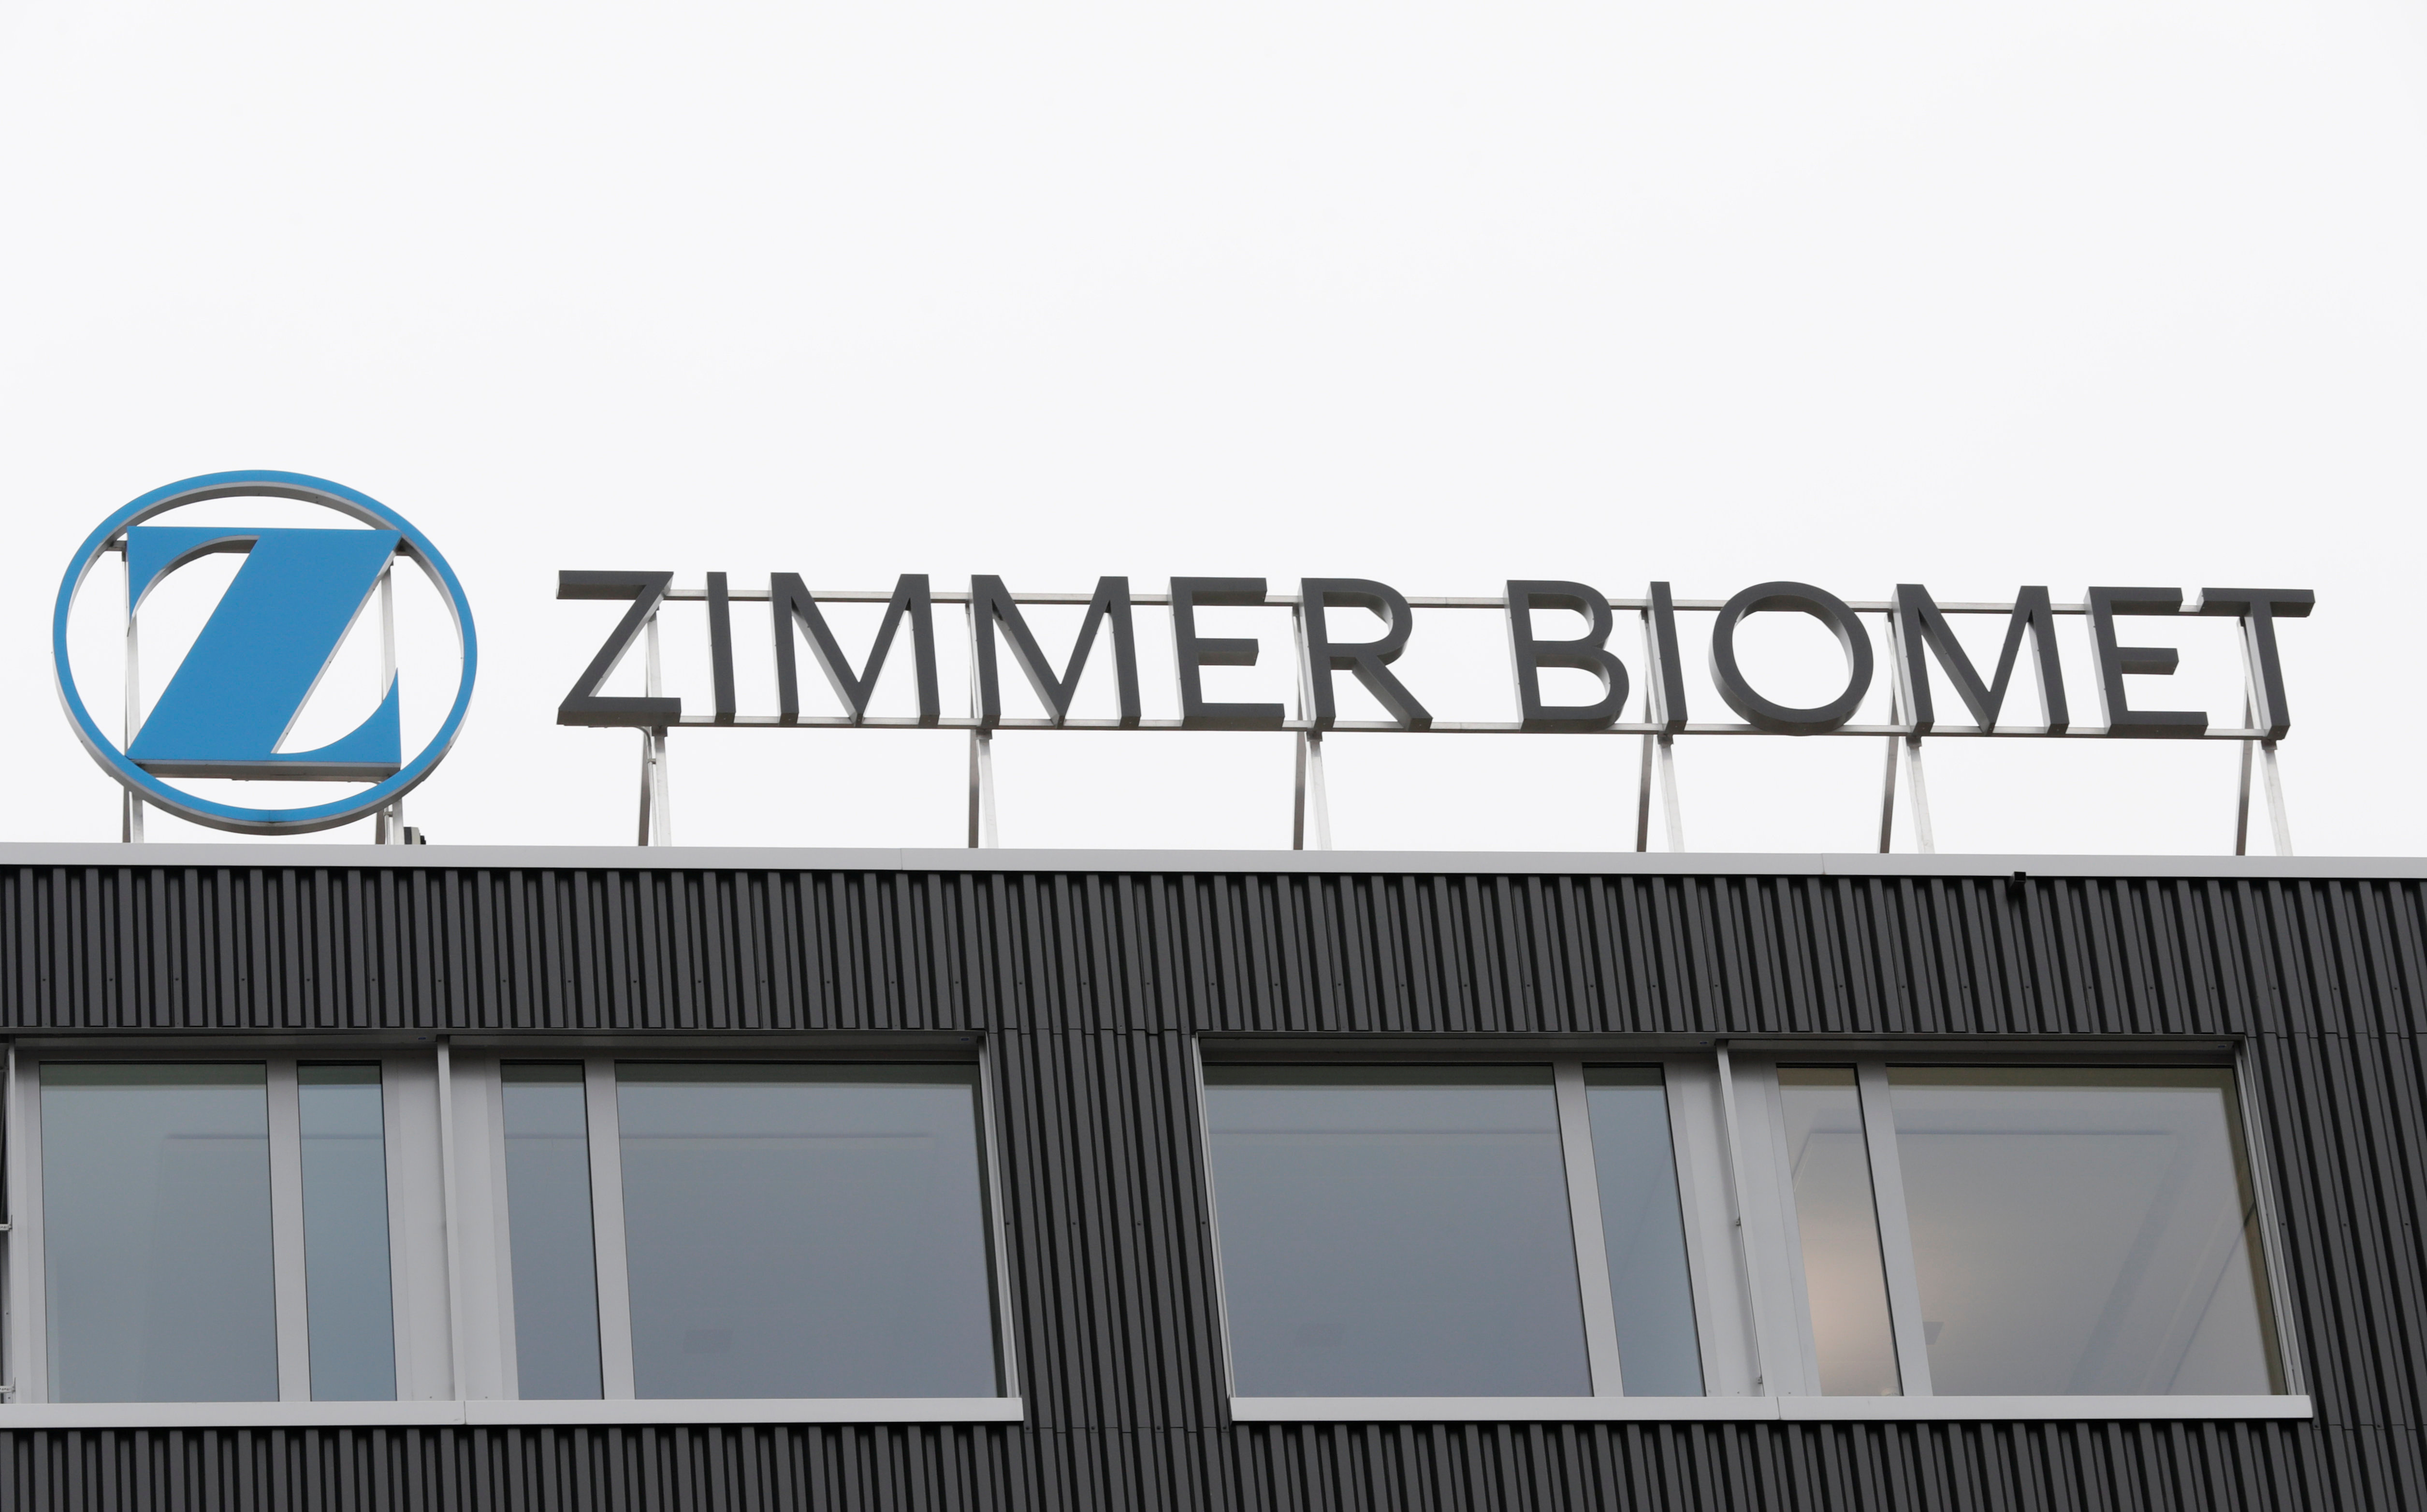 The logo of medical implants maker Zimmer Biomet is seen at a plant in Winterthur